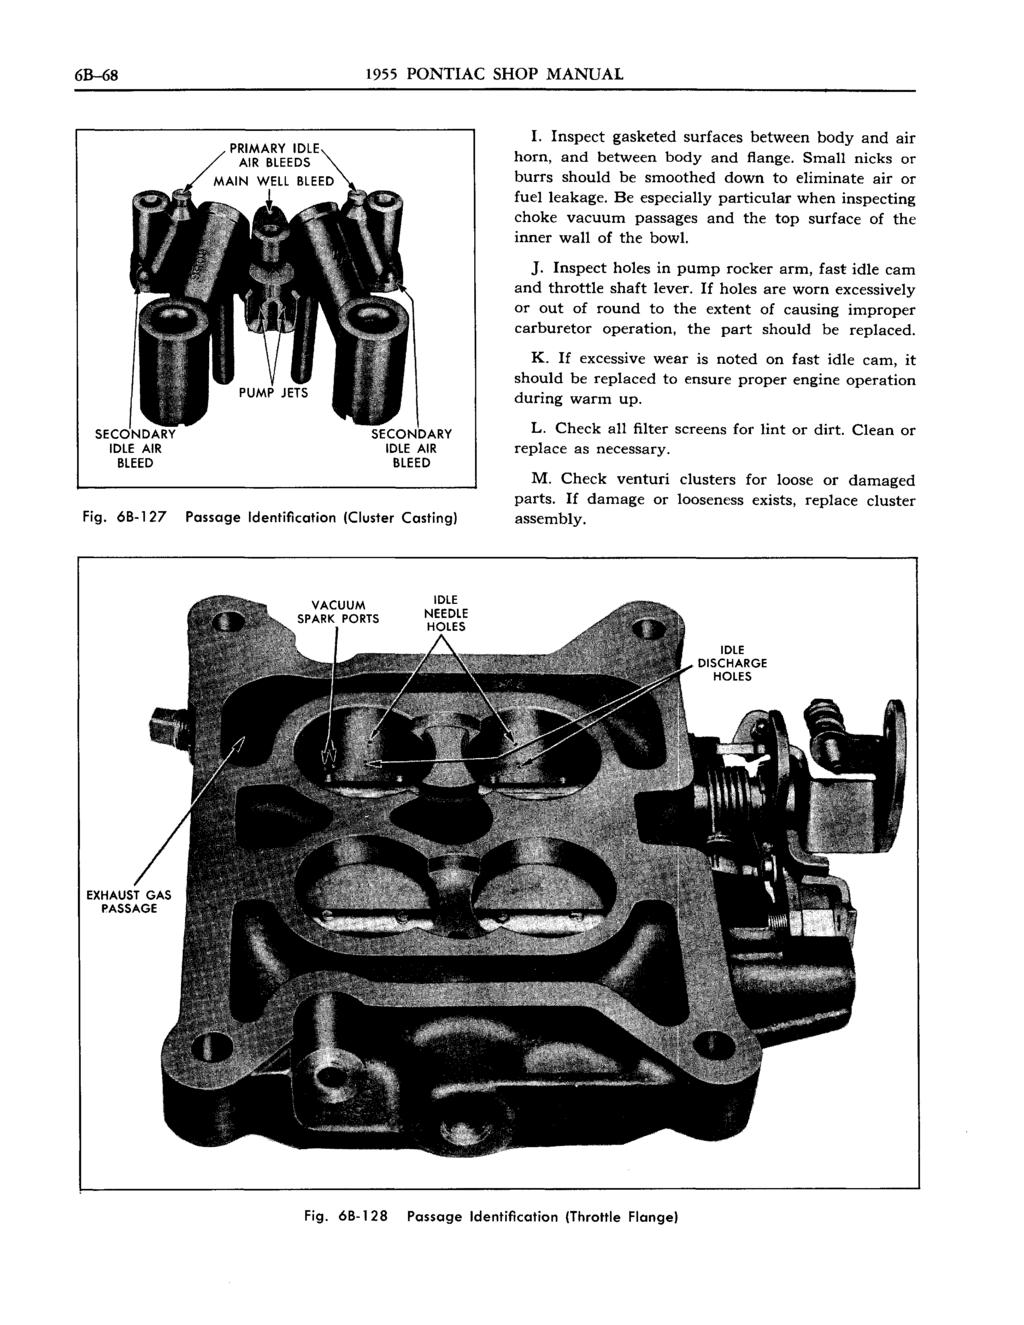 6B-68 1955 PONTIAC SHOP MANUAL SE IDLE AIR BLEED Fig. 68-127 Passage Identification (Cluster Casting) I. Inspect gasketed surfaces between body and air horn, and between body and flange.